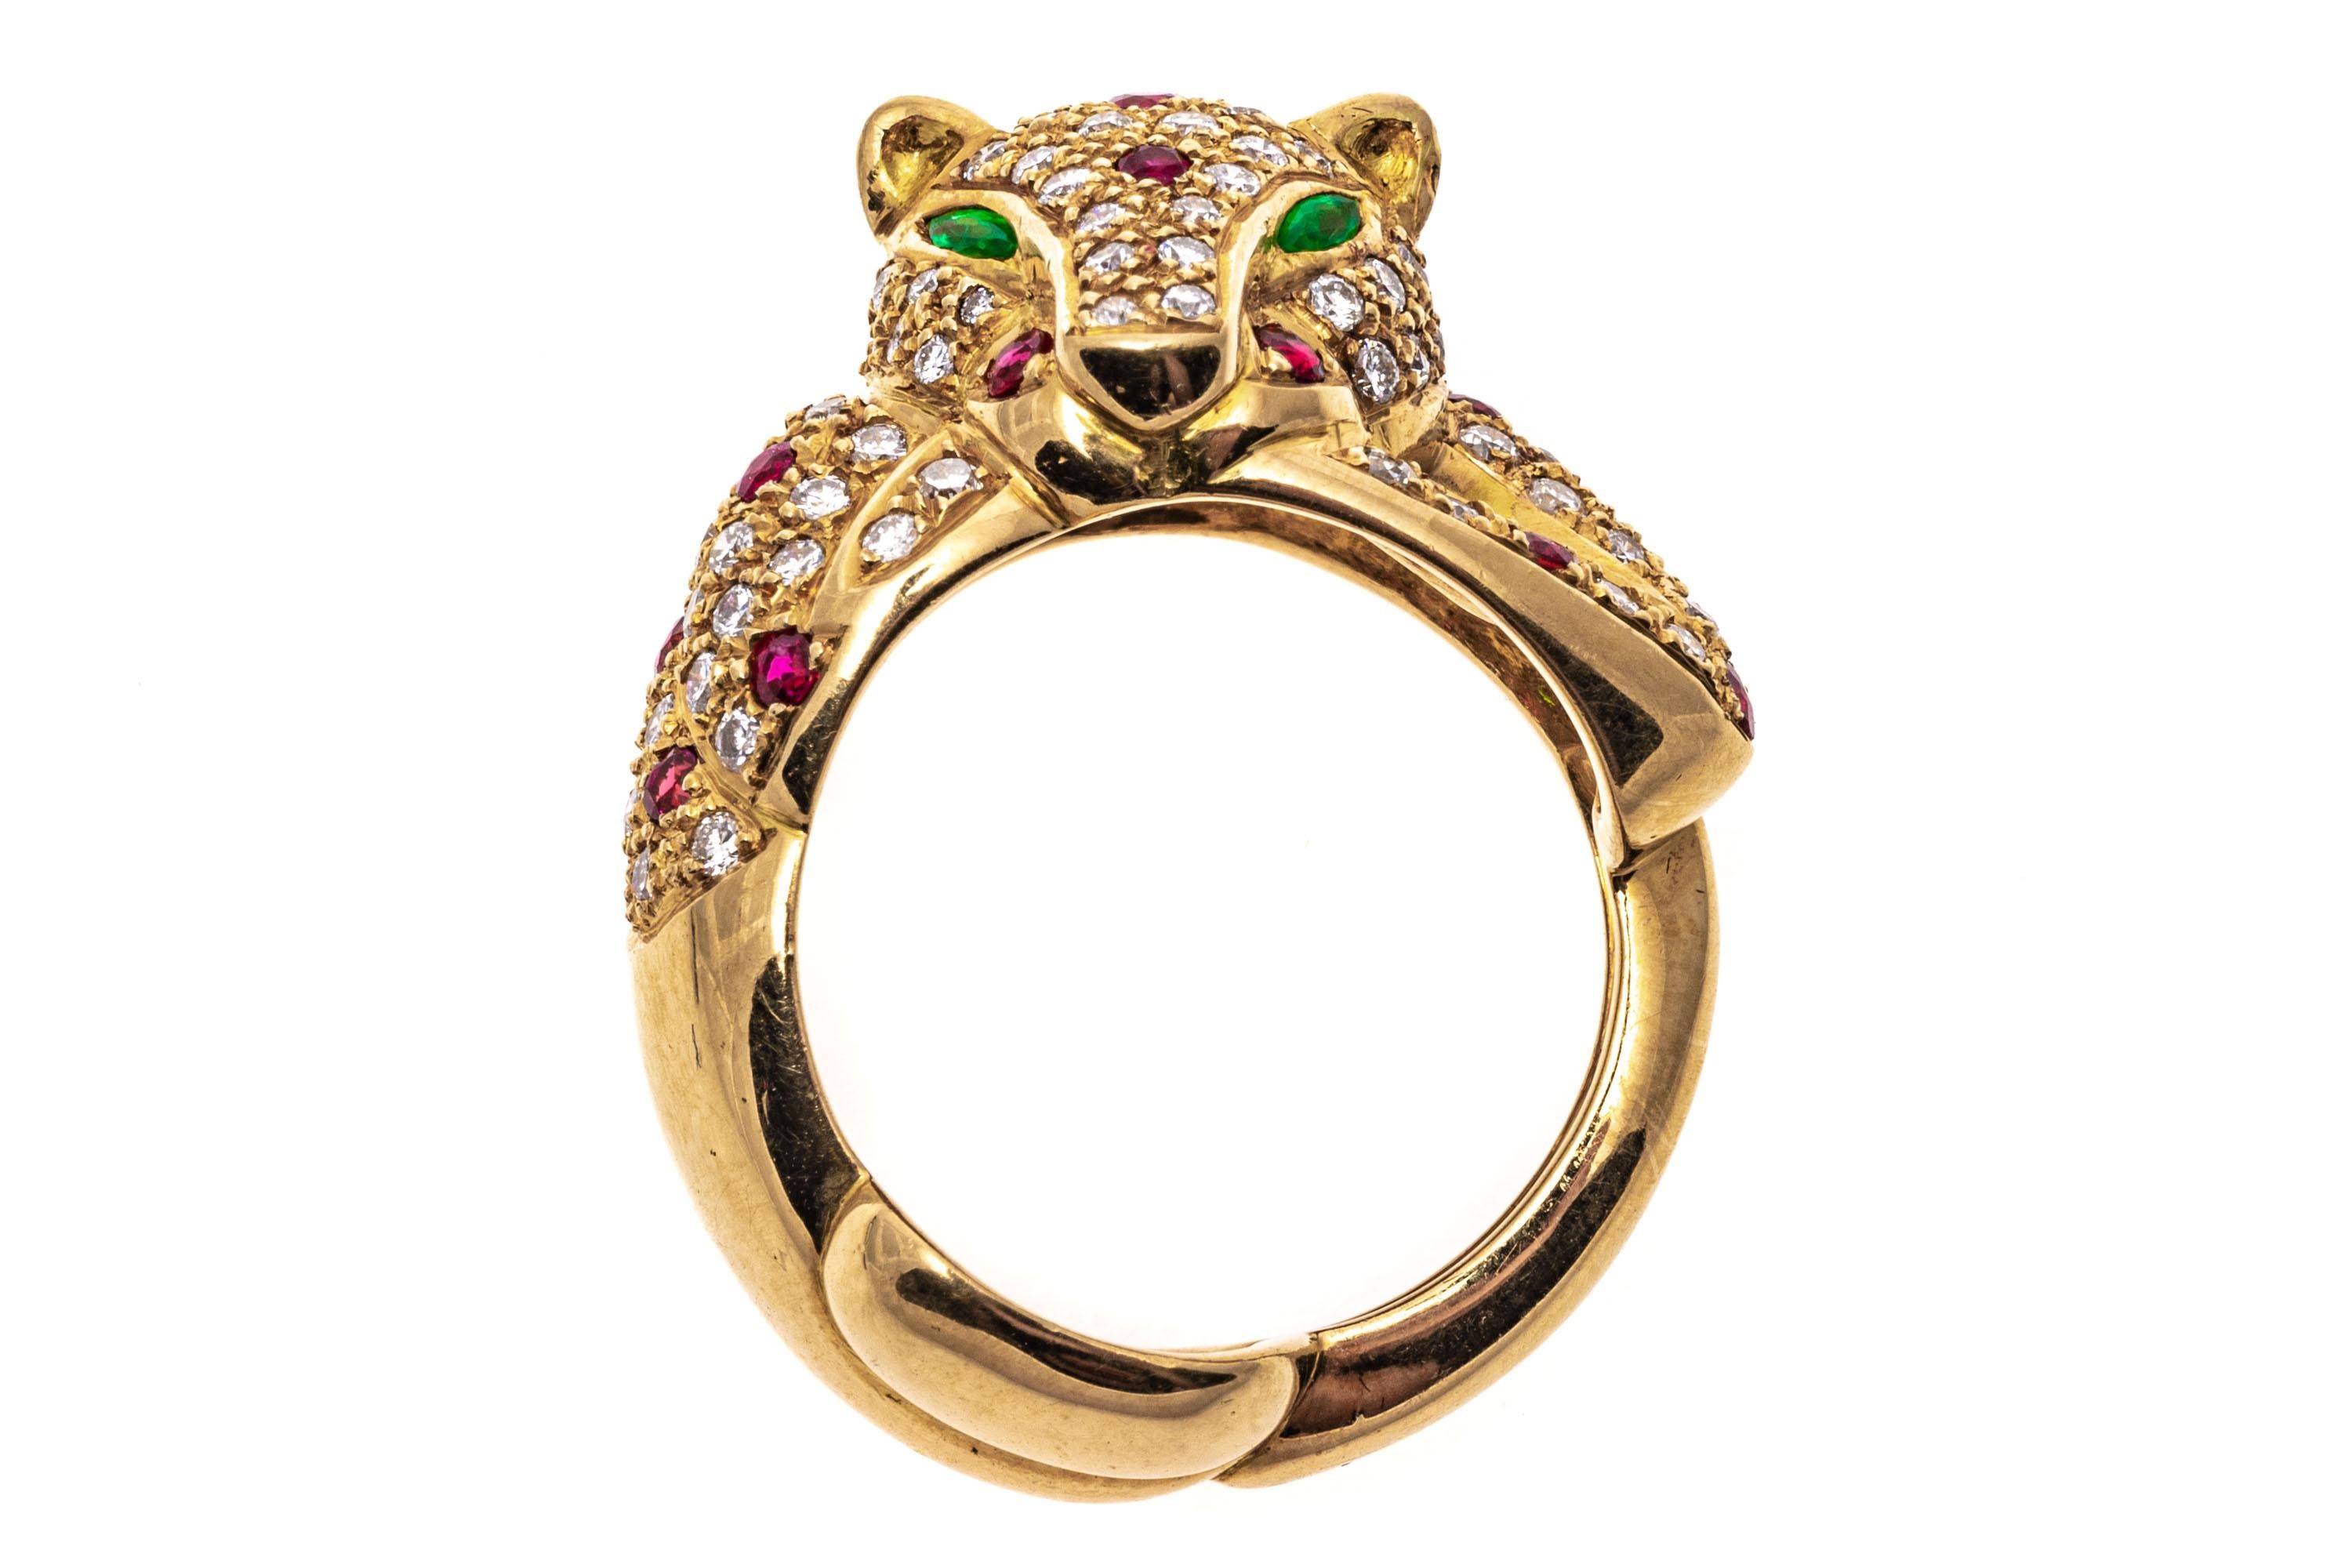 14k yellow gold ring. This beautiful, classic ring is a yellow gold, figural leopard motif, pave set with round faceted diamonds, approximately 1.44 TCW and punctuated with round faceted, red color ruby spots, approximately 0.60 TCW. The ring is